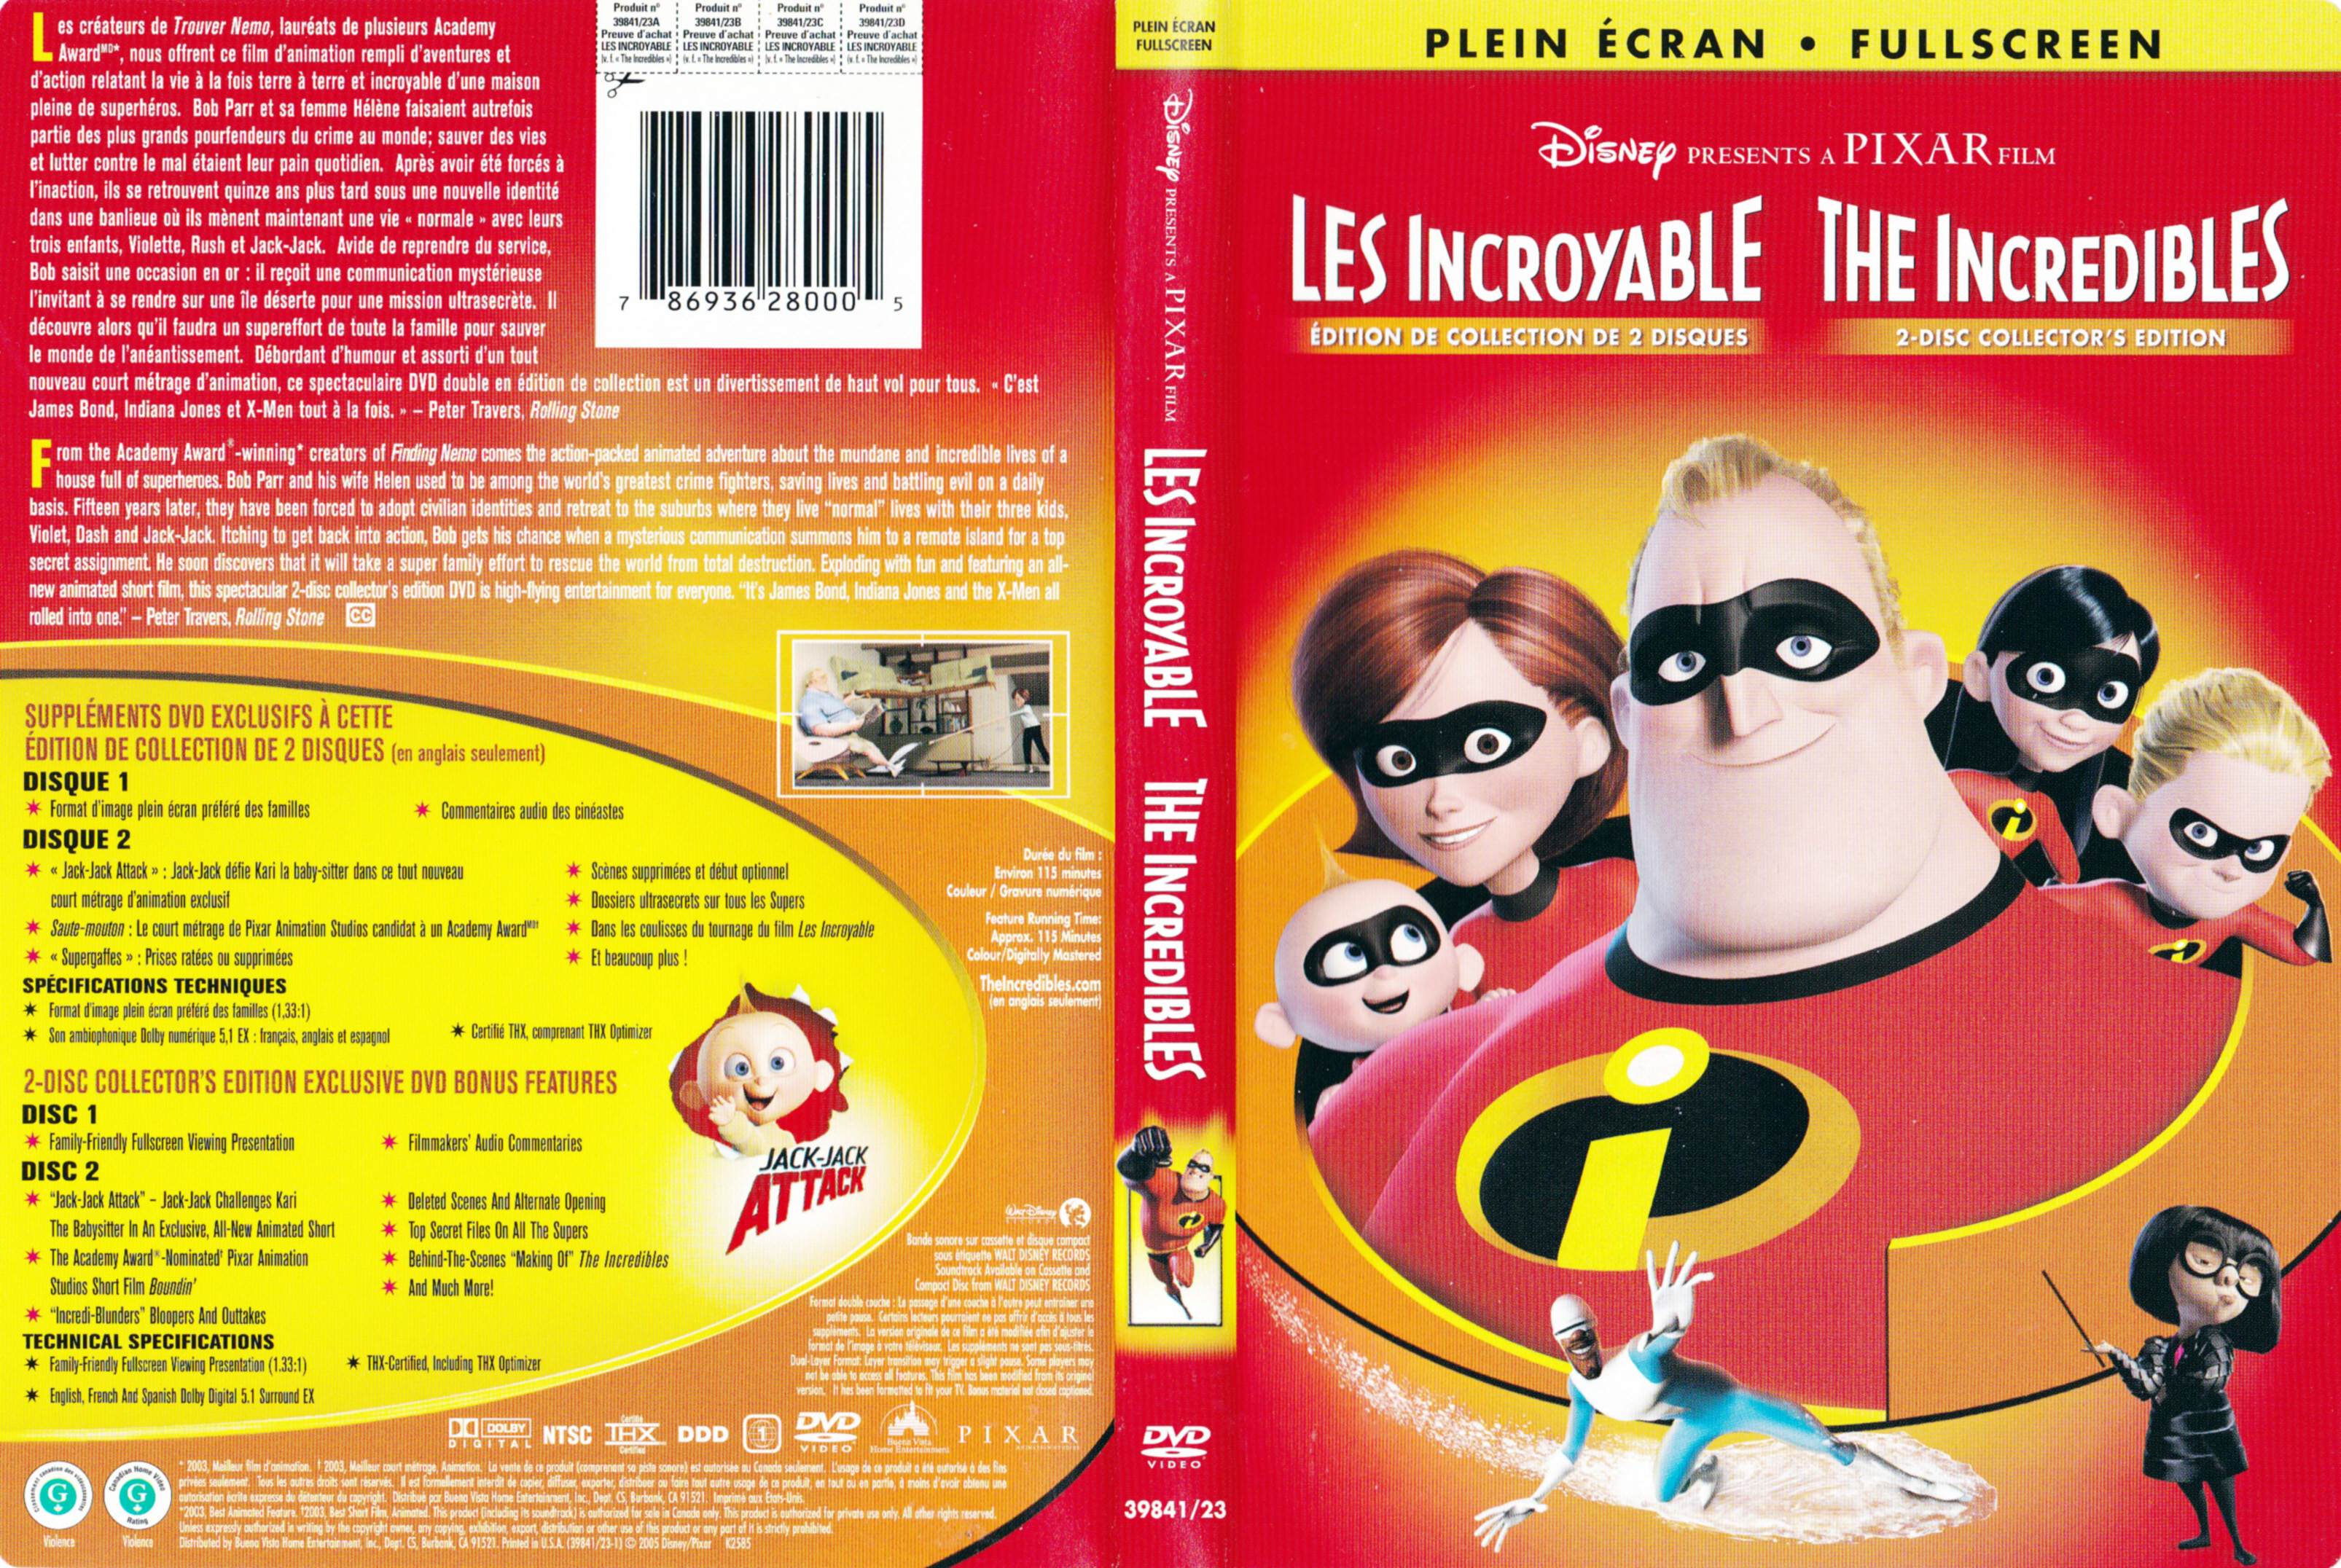 Jaquette DVD Les incroyables - The incredibles (Canadienne)